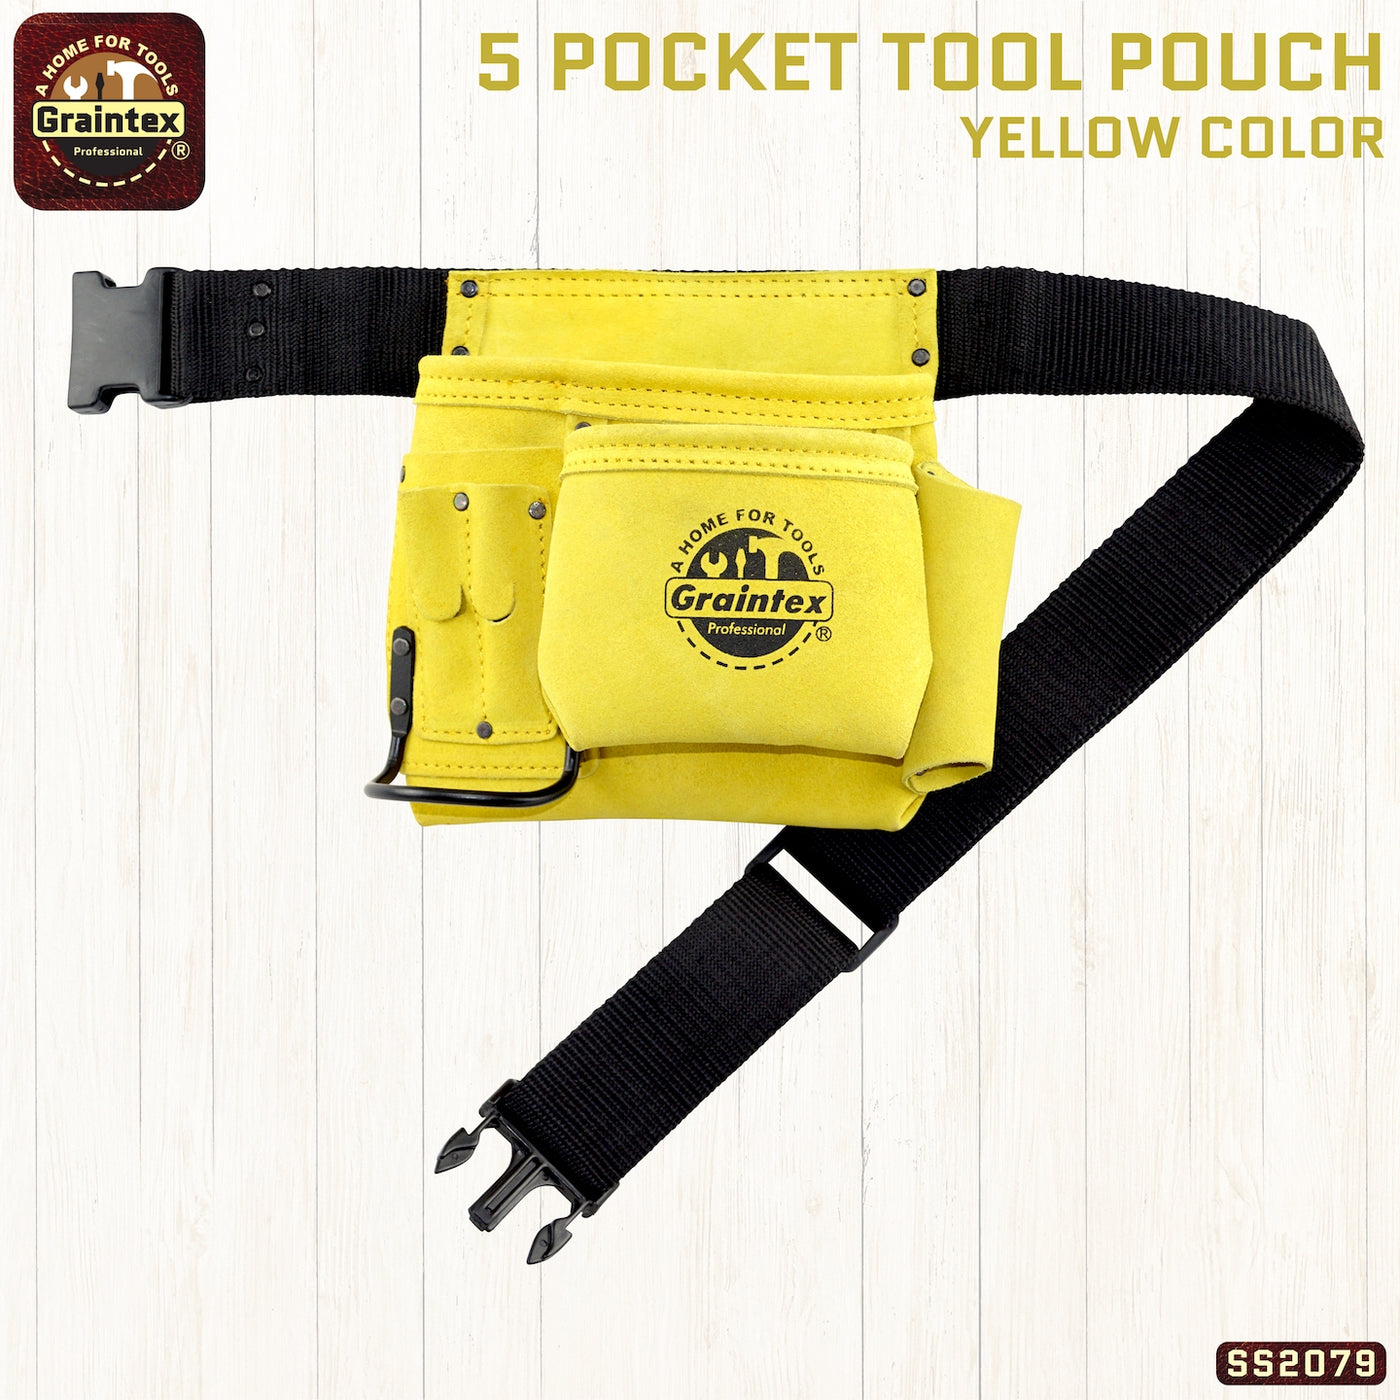 SS2079 :: 5 Pocket Nail & Tool Pouch Yellow Color Suede Leather with Belt